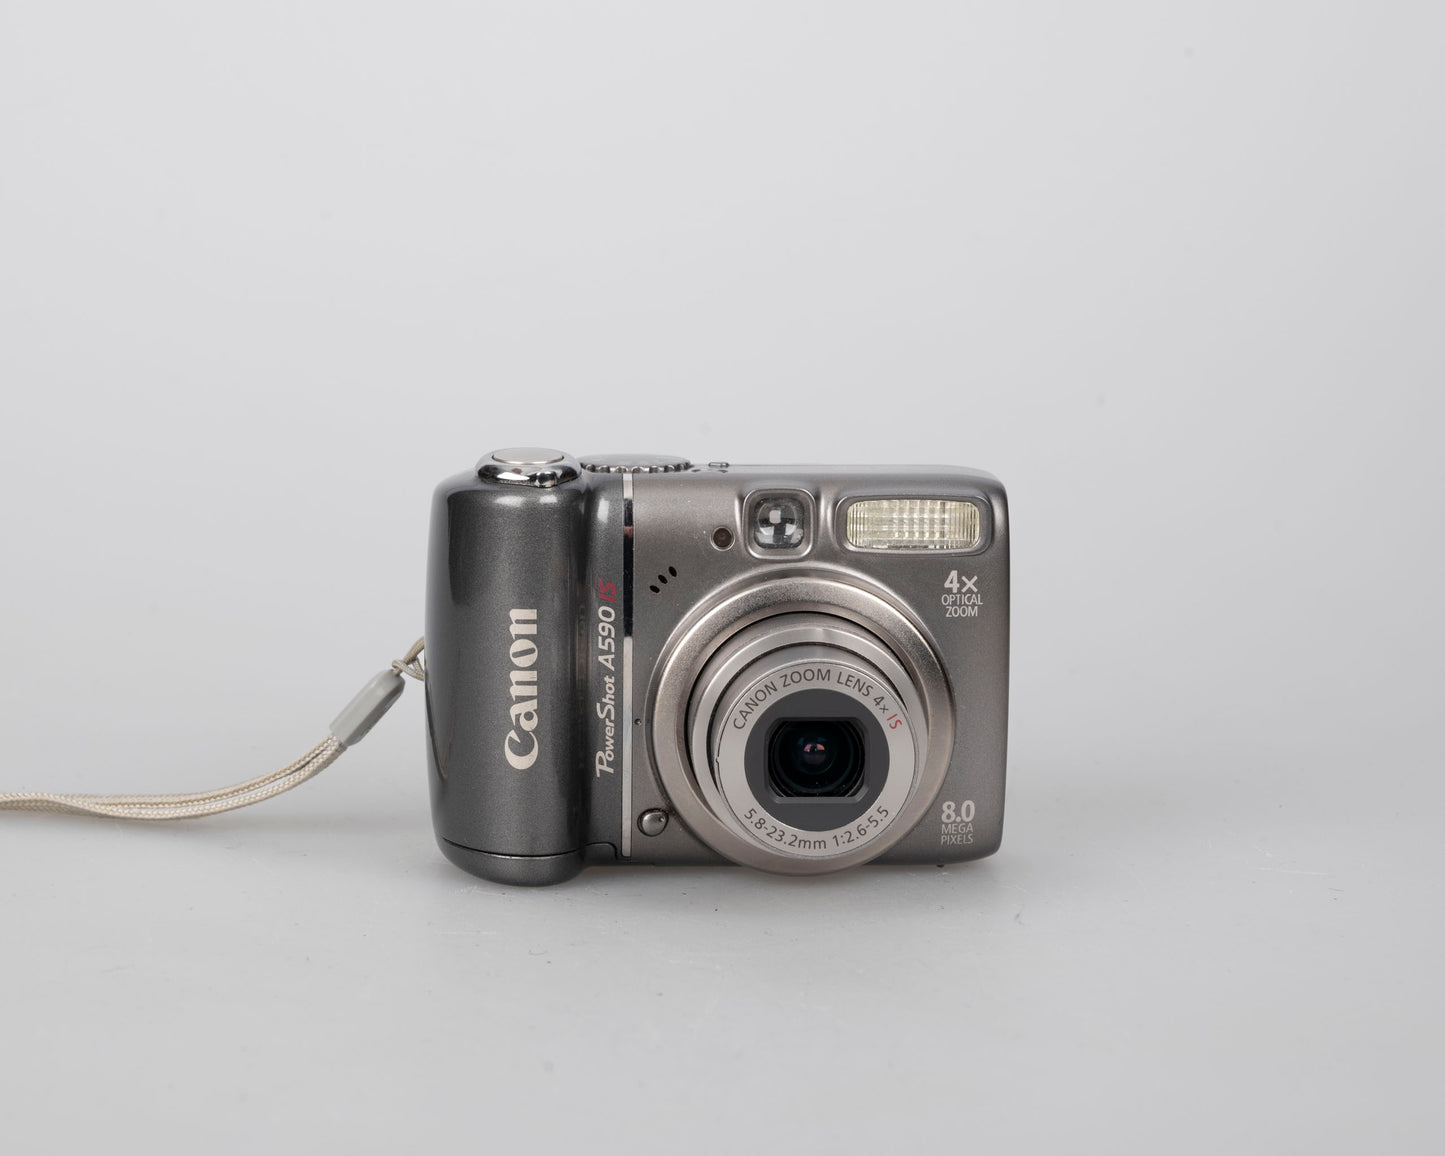 Canon Powershot A590 IS digicam w/ 8 MP CCD sensor; includes 512MB SD card (uses AA batteries)